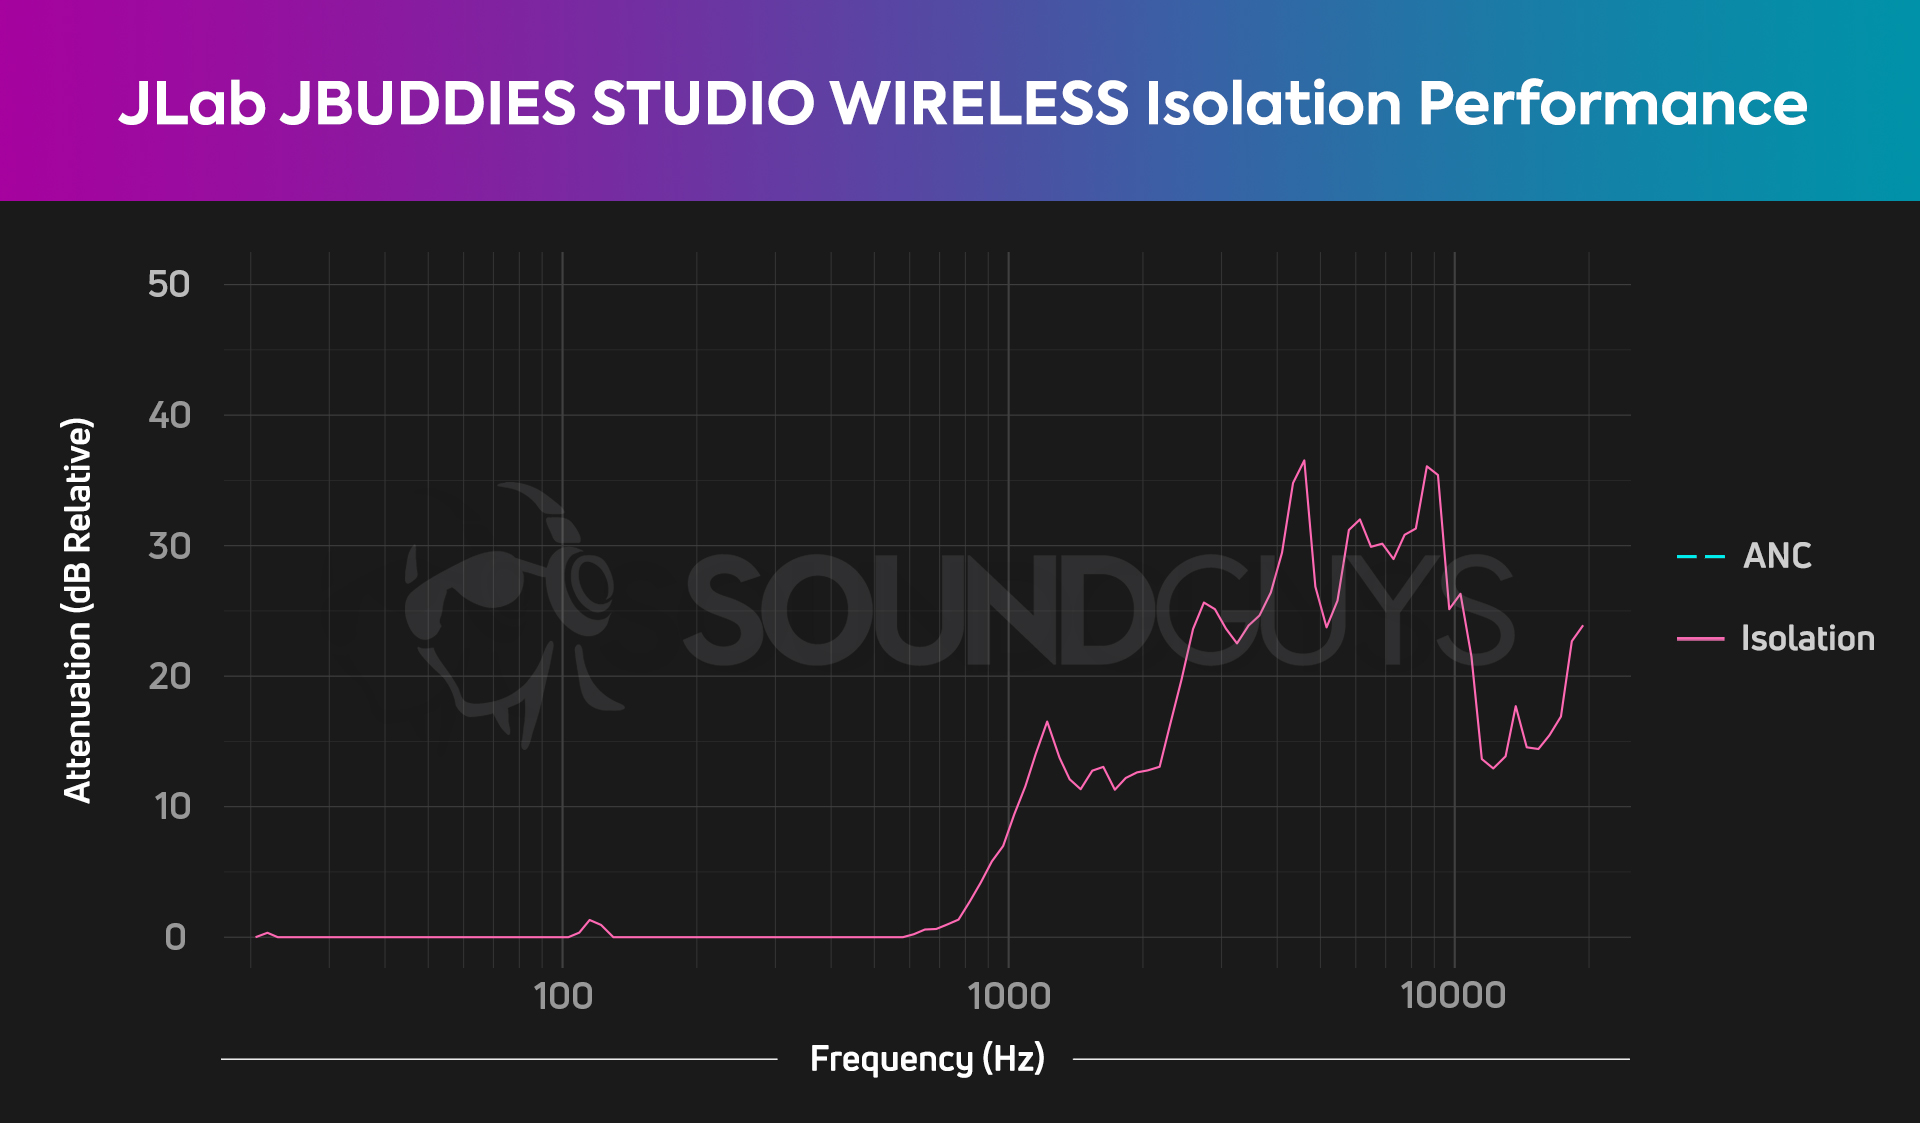 A chart showing the noise isolation performance of the JLab JBUDDIES STUDIO WIRELESS.